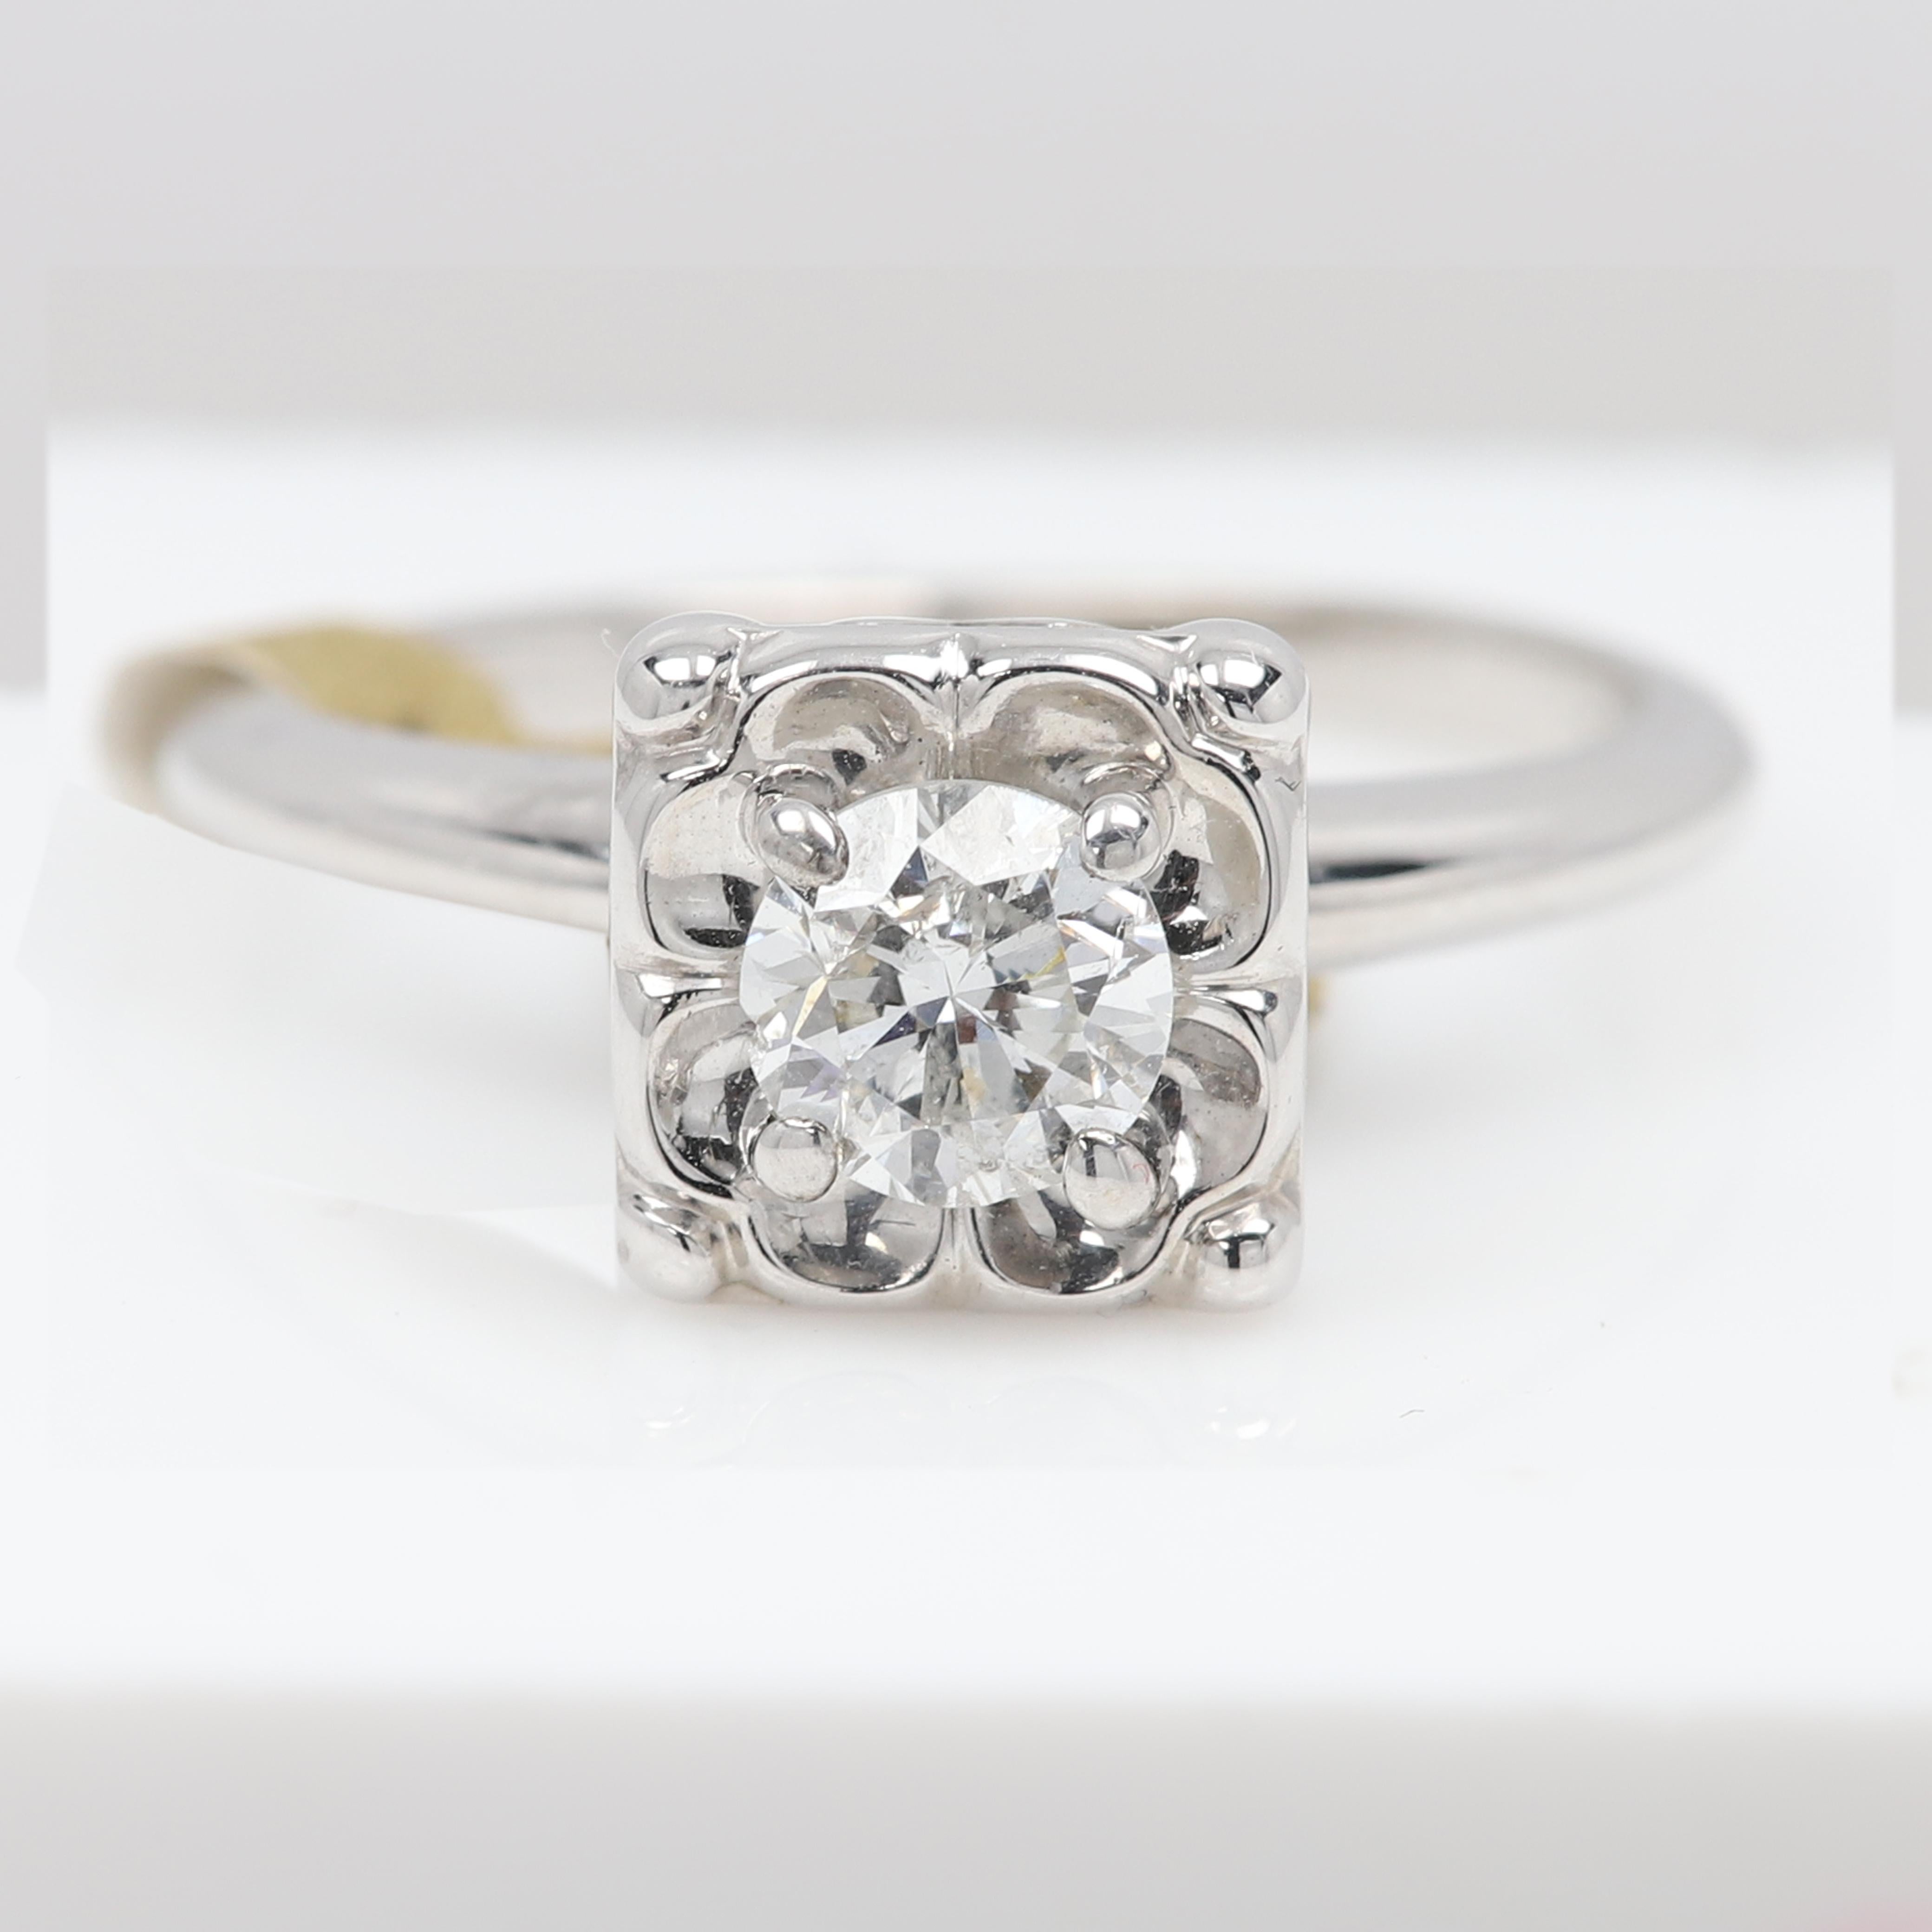 Vintage Art Deco Round Diamond Ring
Has a simplicity beauty to it, not too gaudy.
Diamond is 0.55 carat round GH-SI1 nice average quality 
Finger size 6
White Gold 3.3 grams.
design area size is approx 8 x 8 mm
pre owned in great condition as- new
